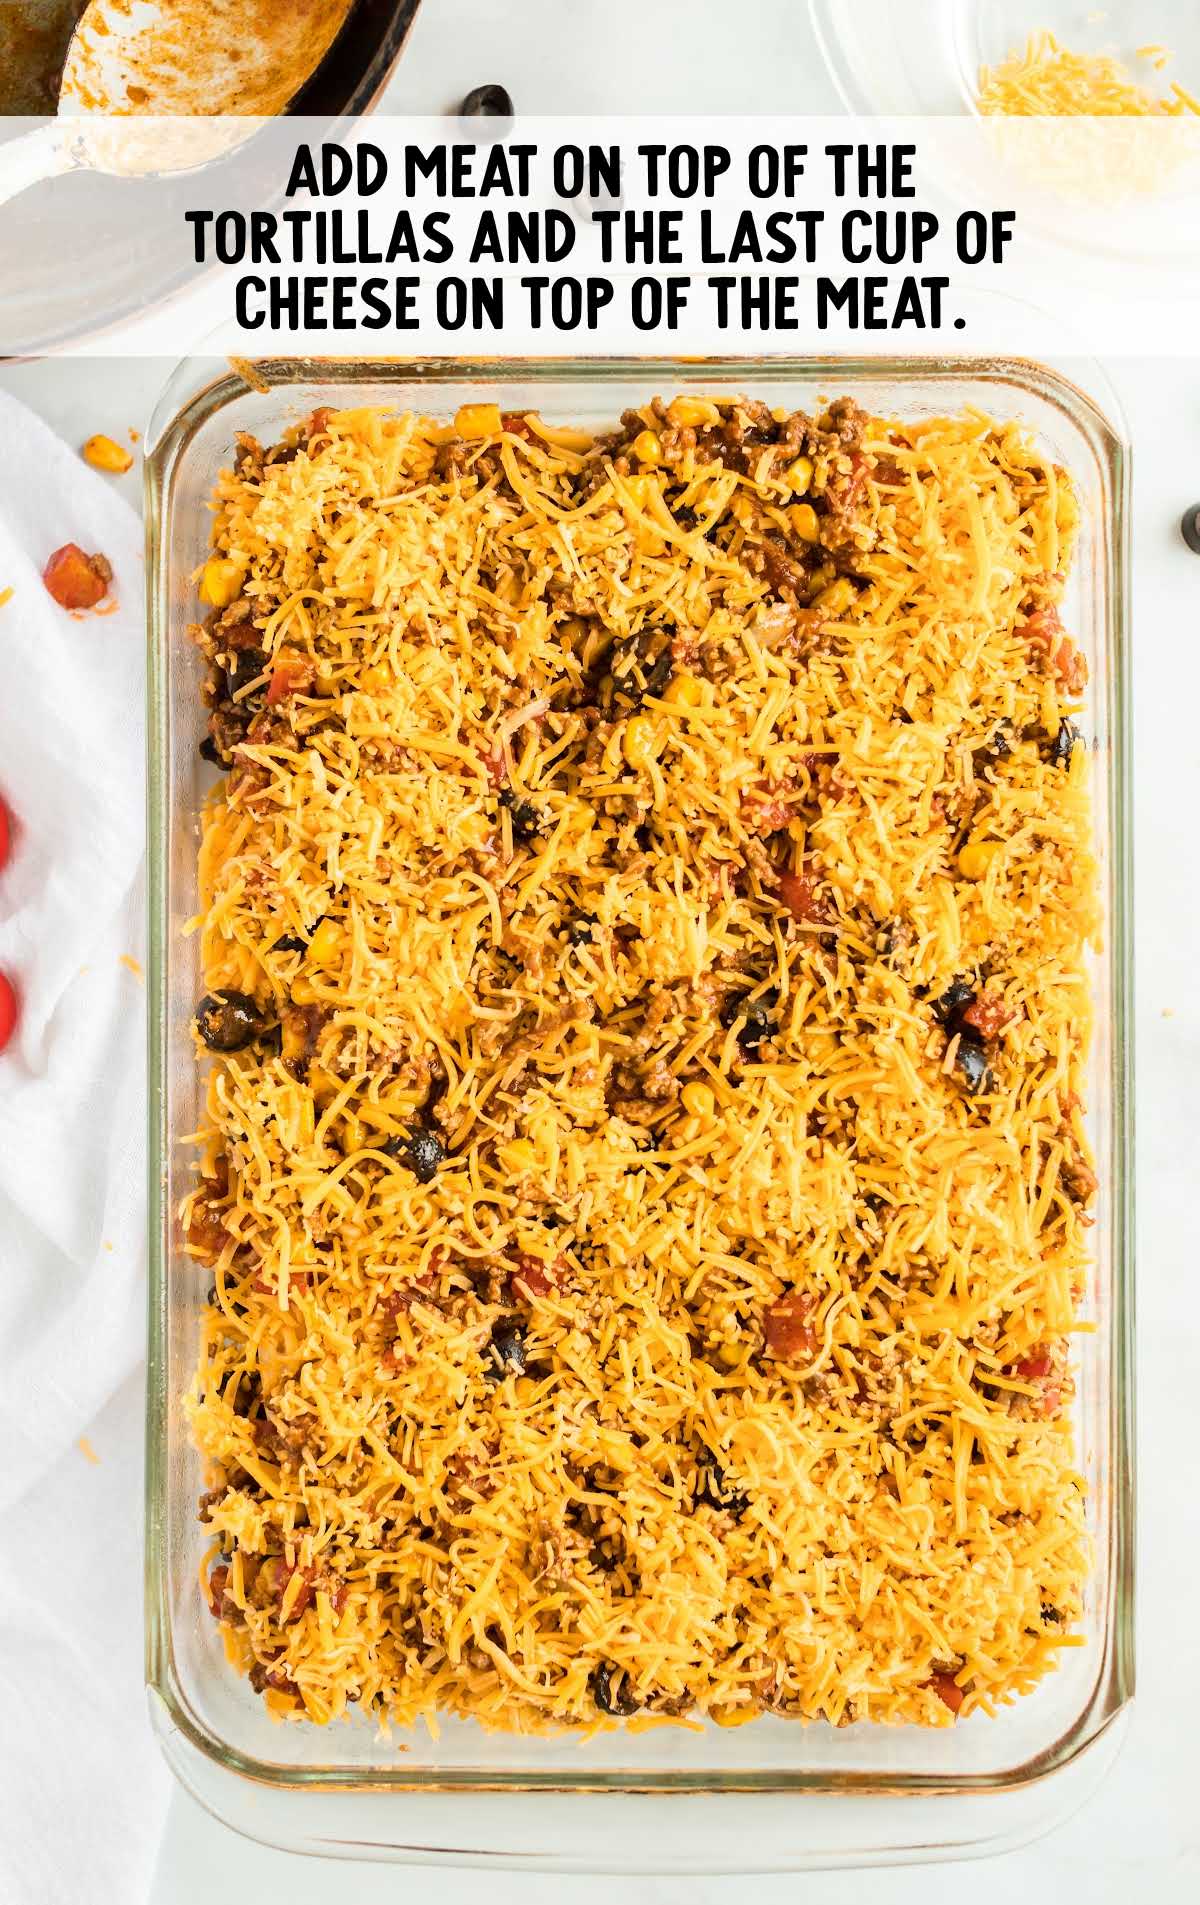 meat mixture, cheese, and tortillas added to a baking dish